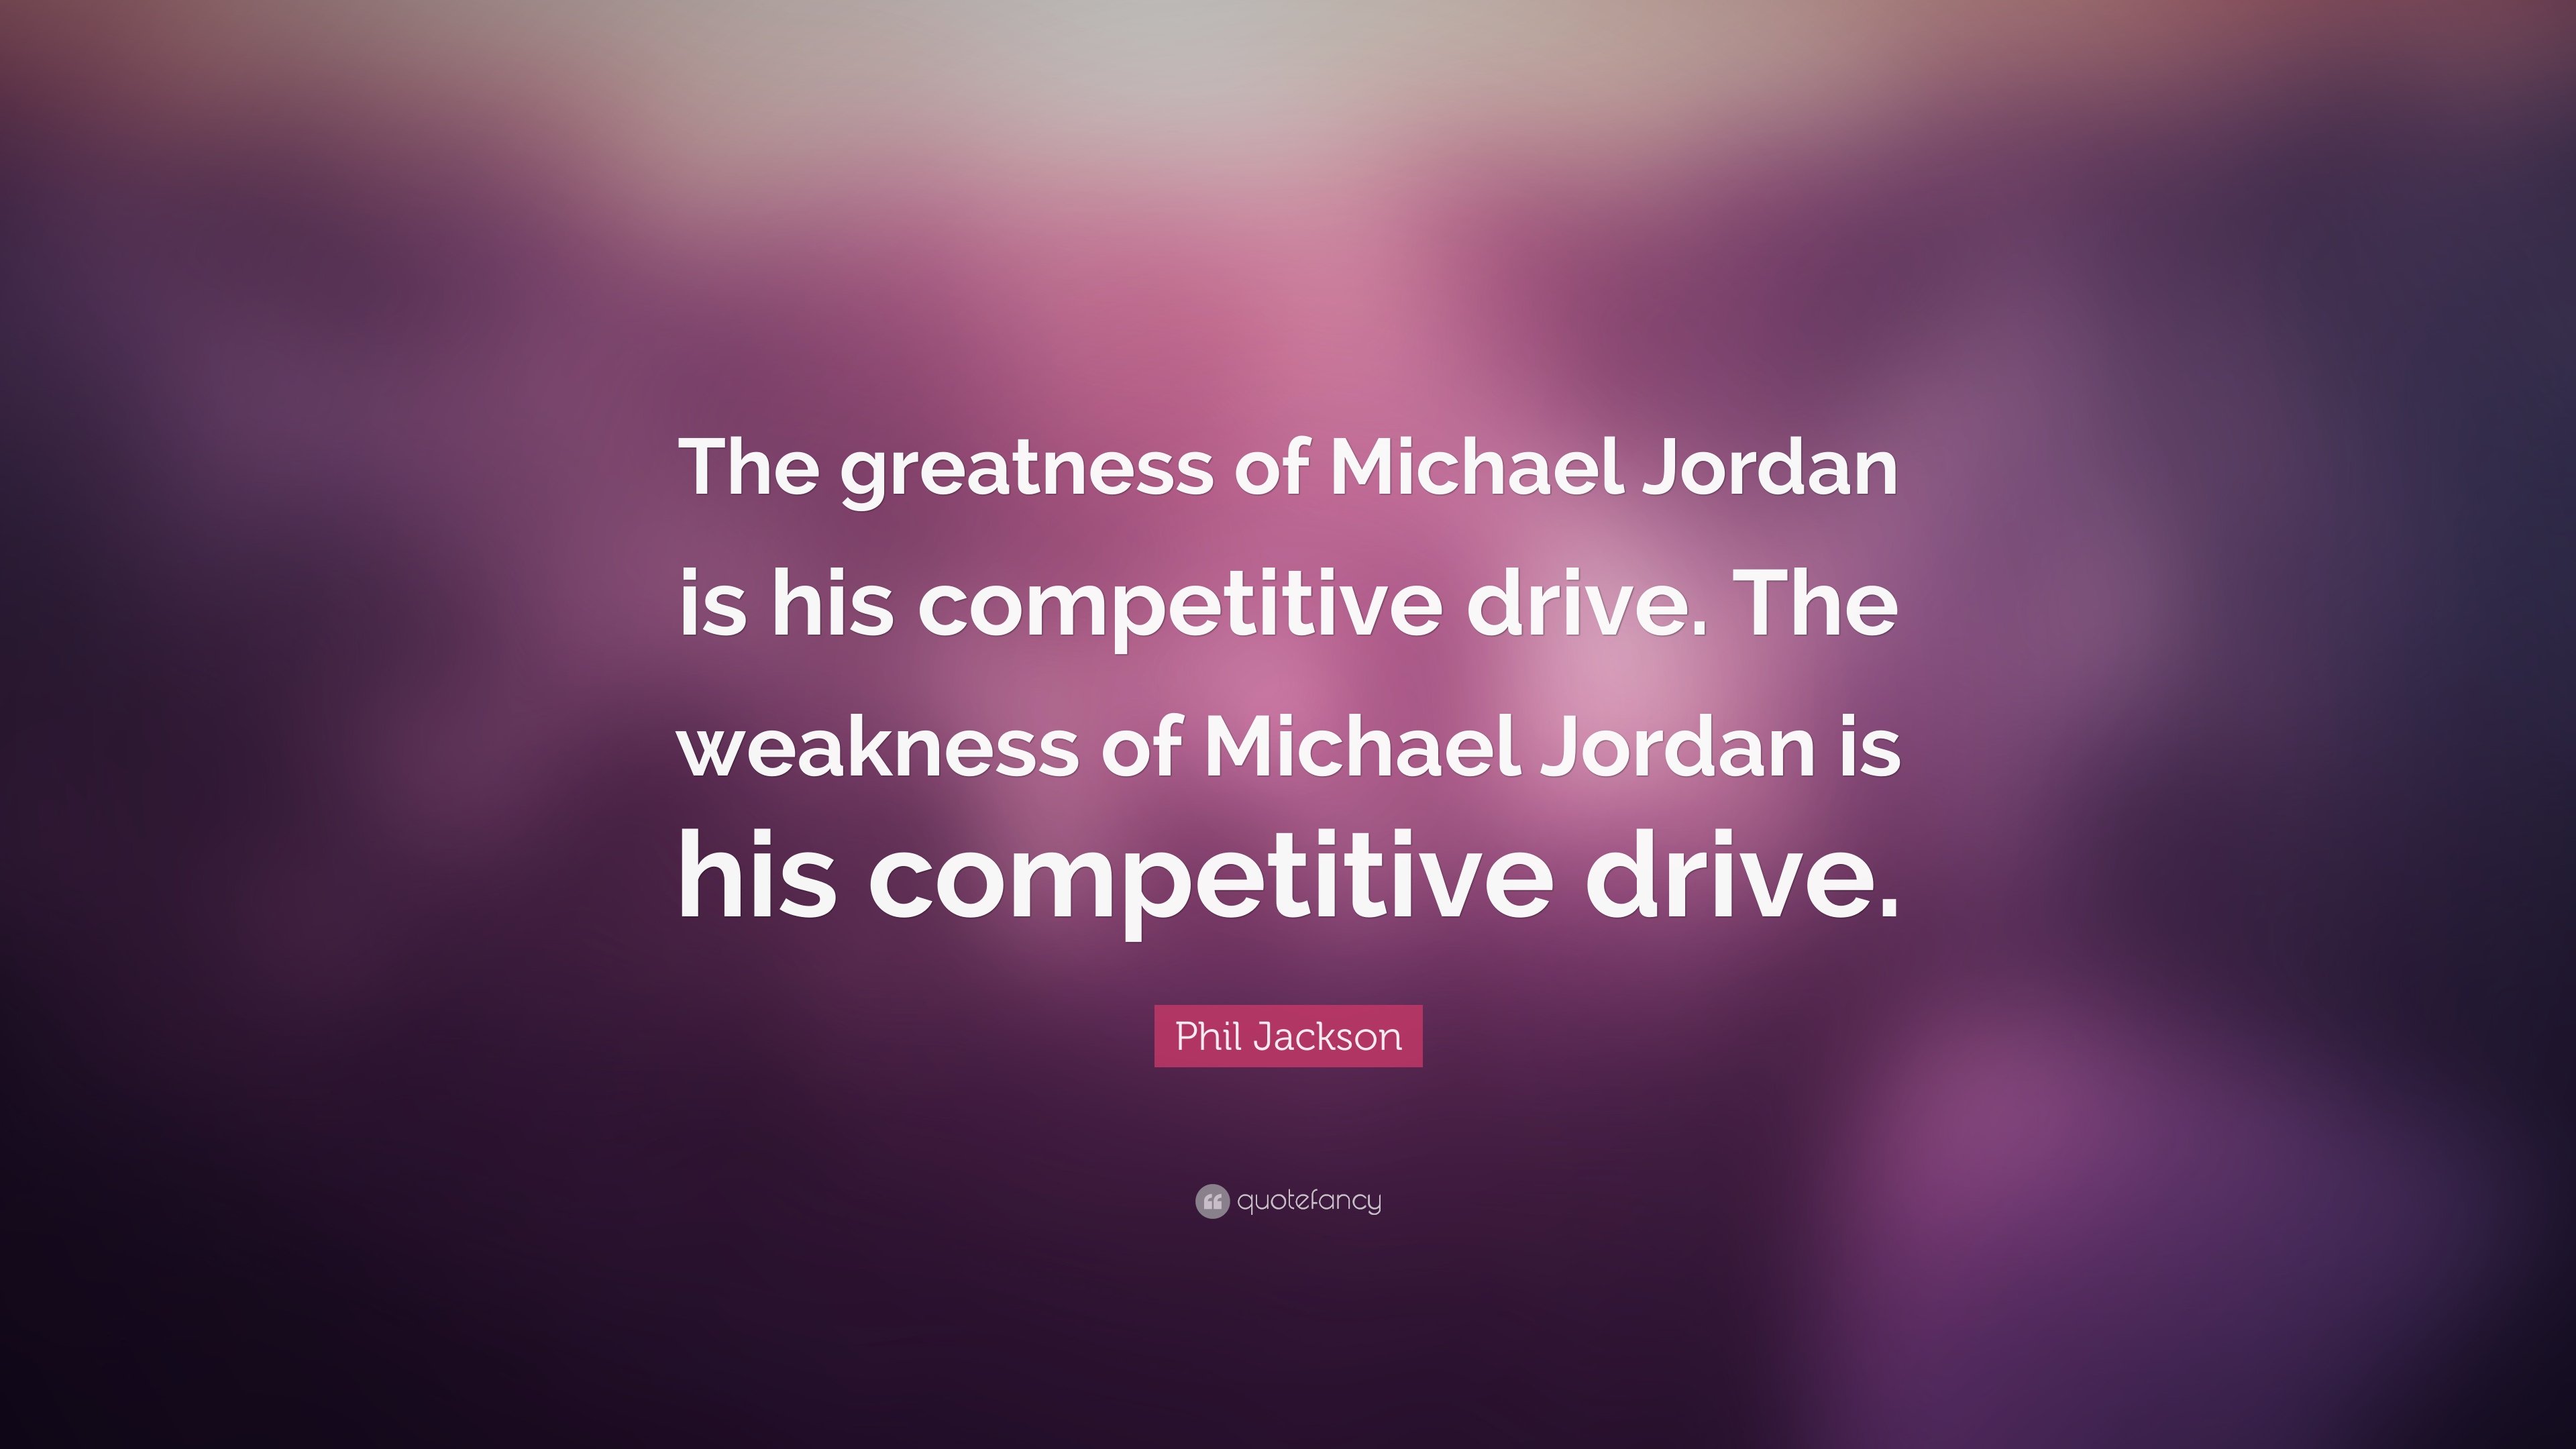 Phil Jackson Quote: “The greatness of Michael Jordan is his competitive drive. The weakness of Michael